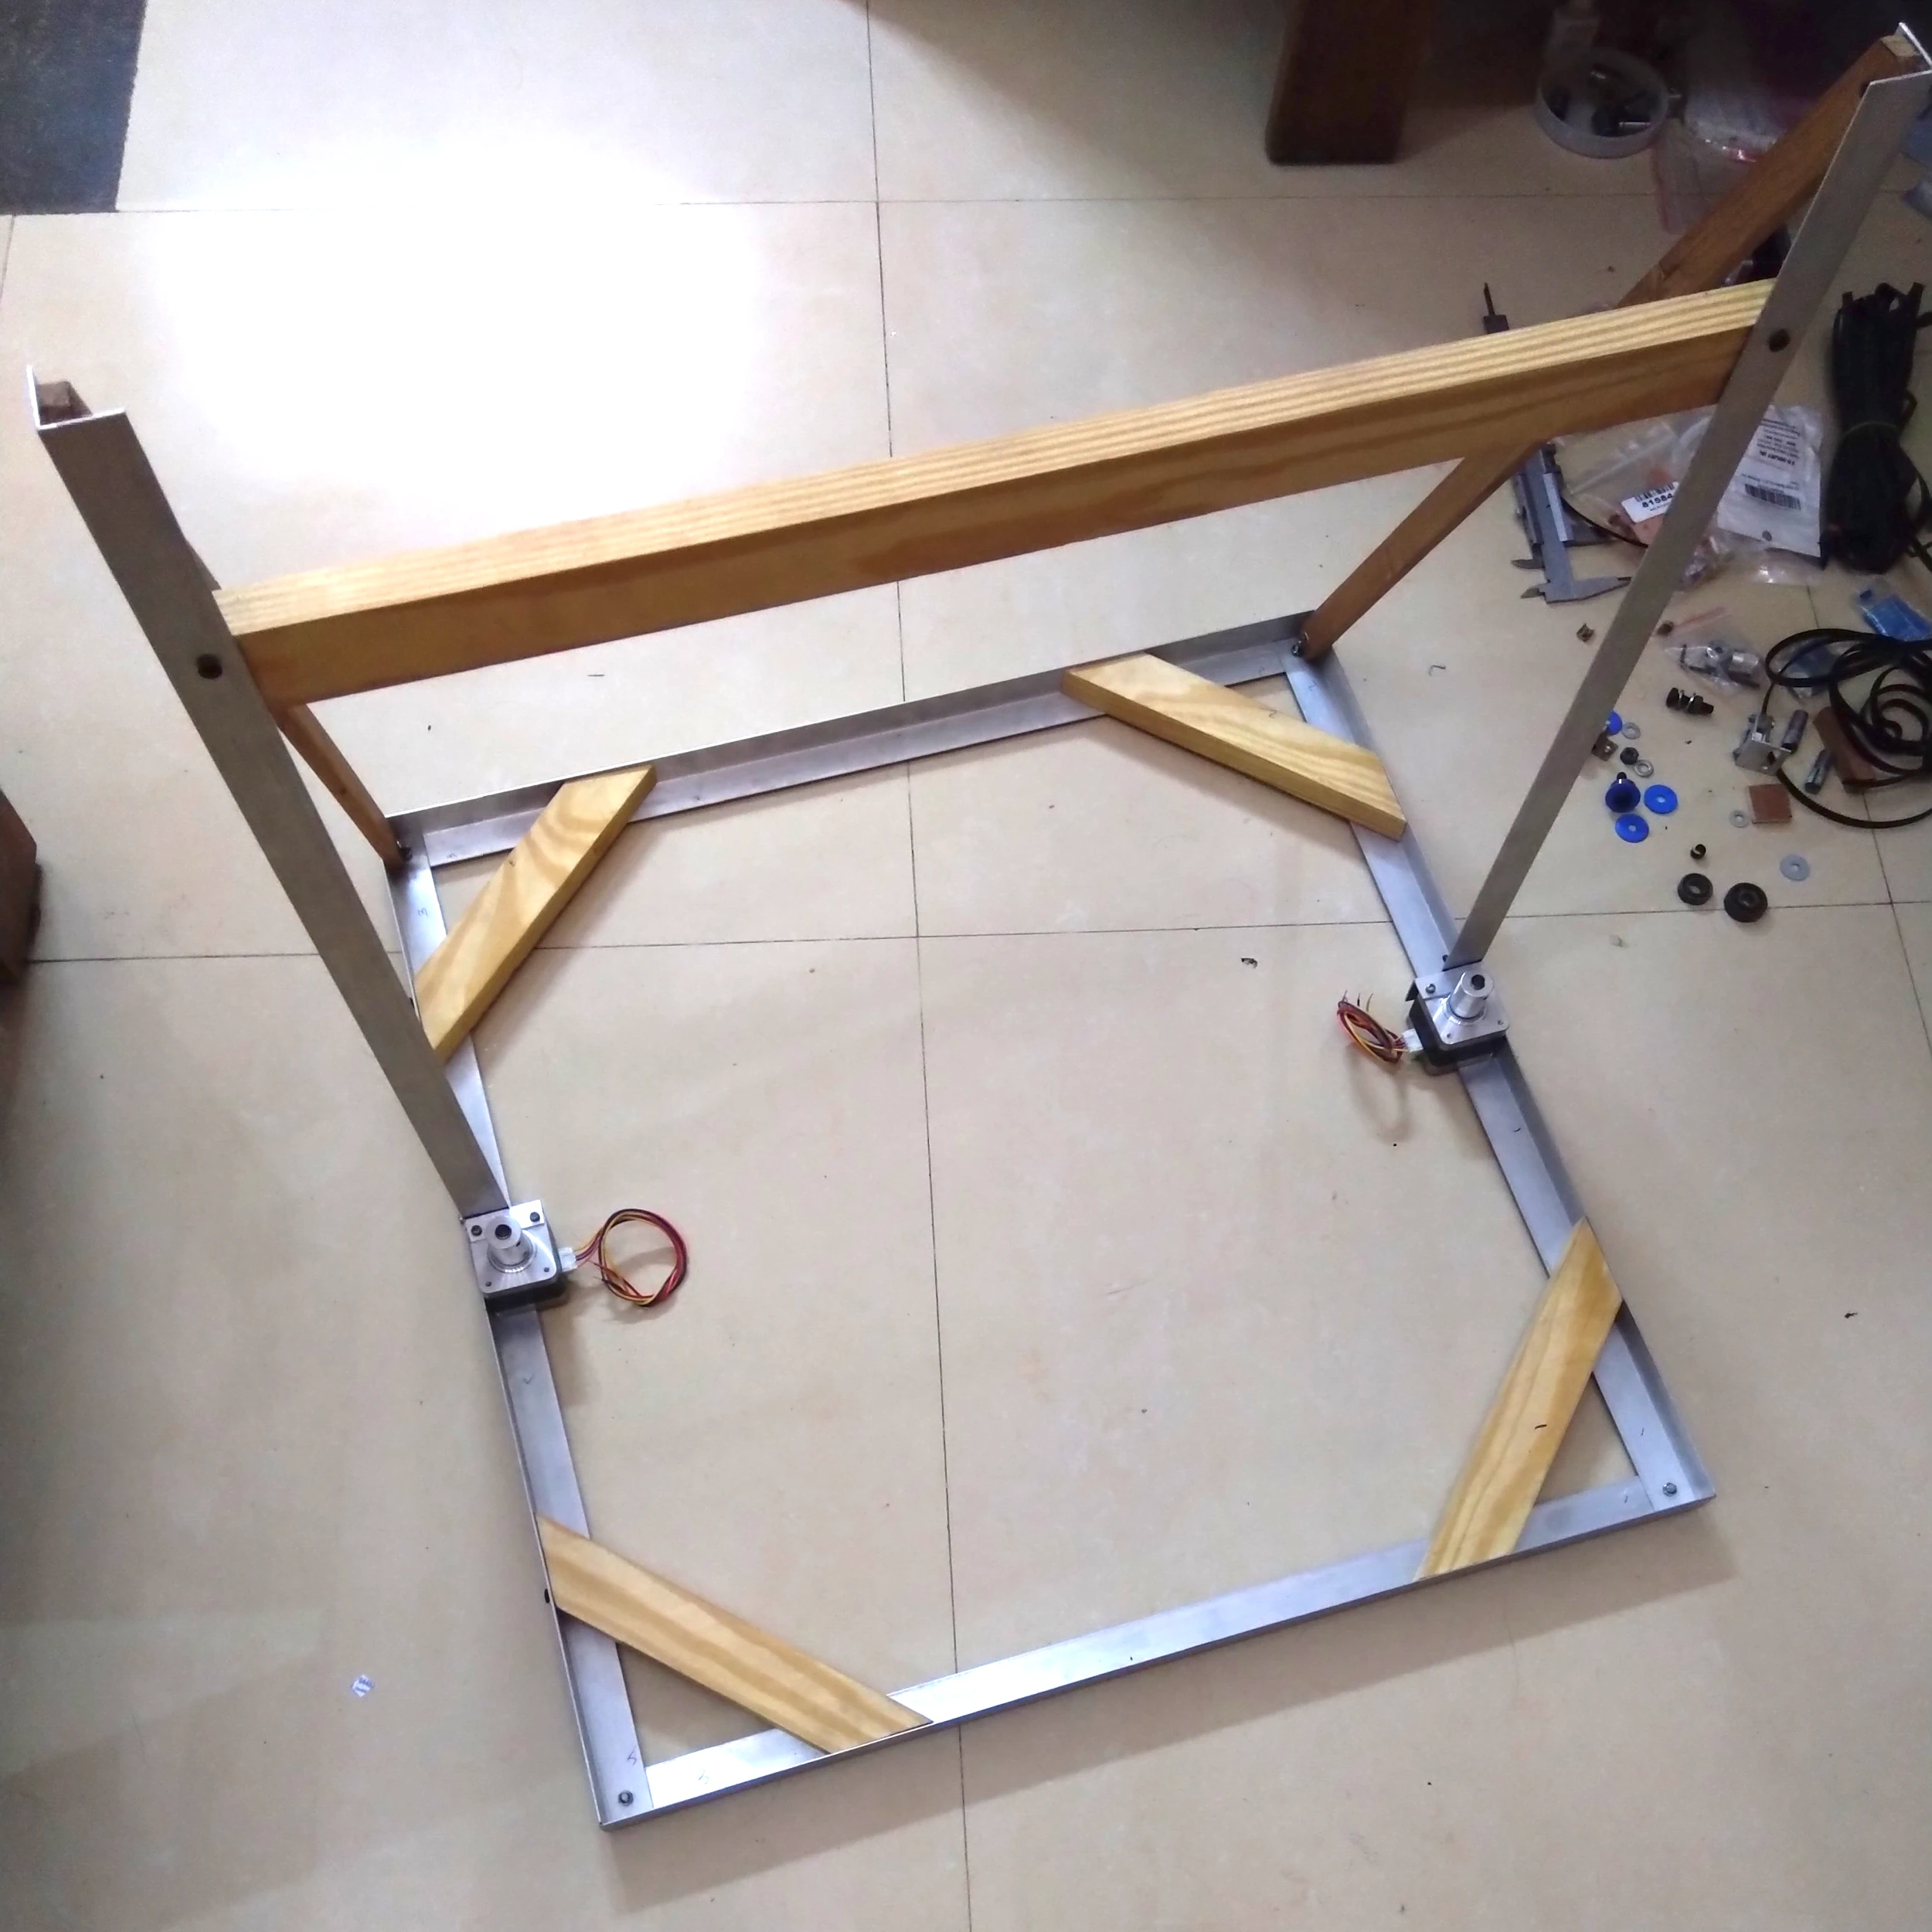 Frame with Z axis supports